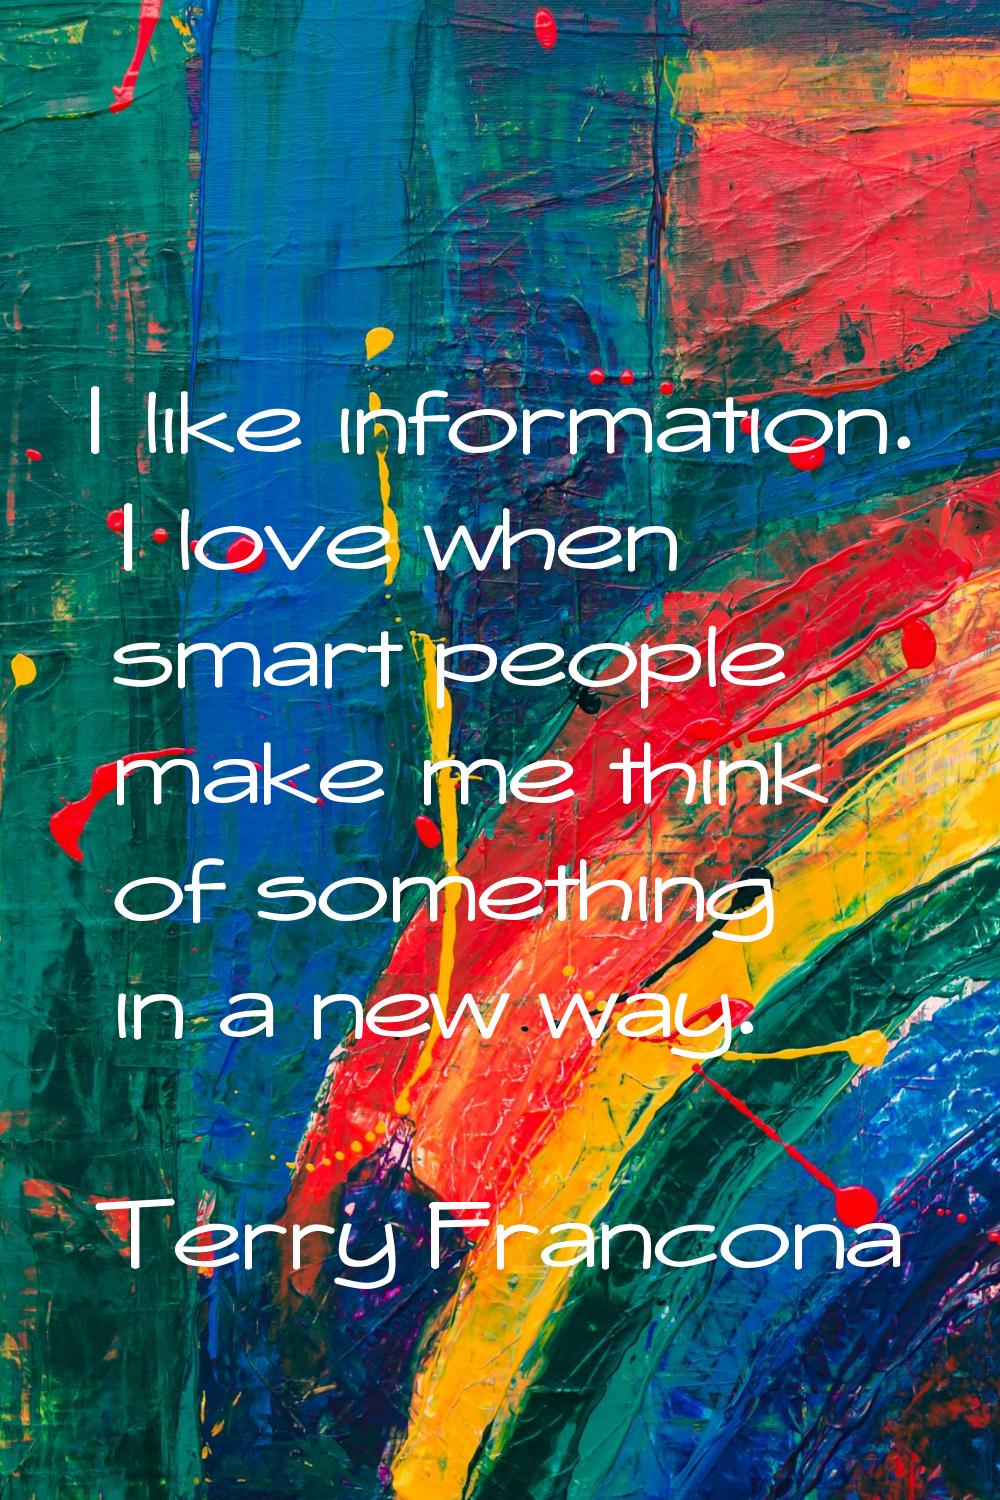 I like information. I love when smart people make me think of something in a new way.